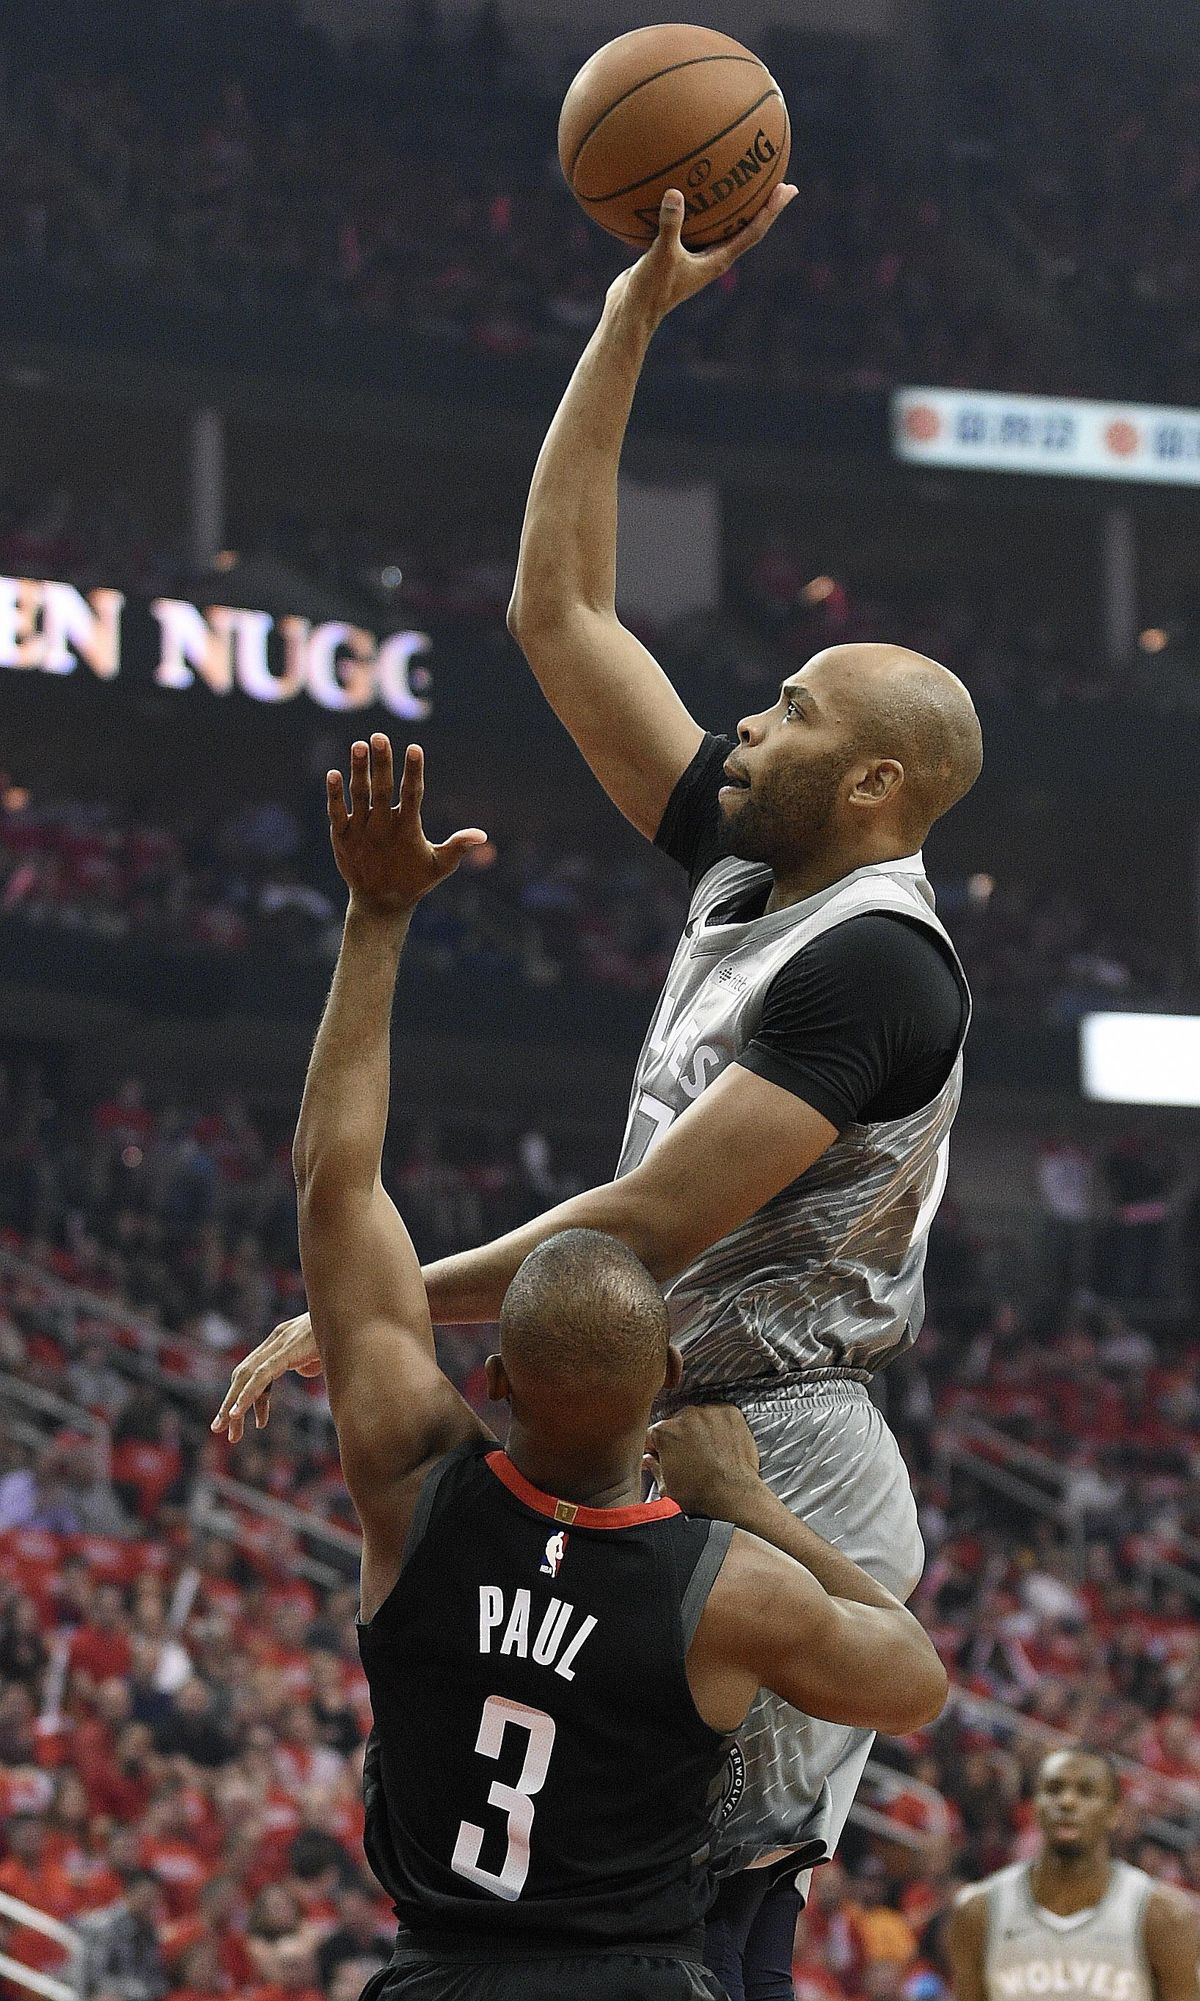 Minnesota Timberwolves forward Taj Gibson shoots over Houston Rockets guard Chris Paul (3) during the first half in Game 2 of a first-round NBA basketball playoff series Wednesday, April 18, 2018, in Houston. (AP Photo/Eric Christian Smith) ORG XMIT: TXES109 (Eric Christian Smith / AP)